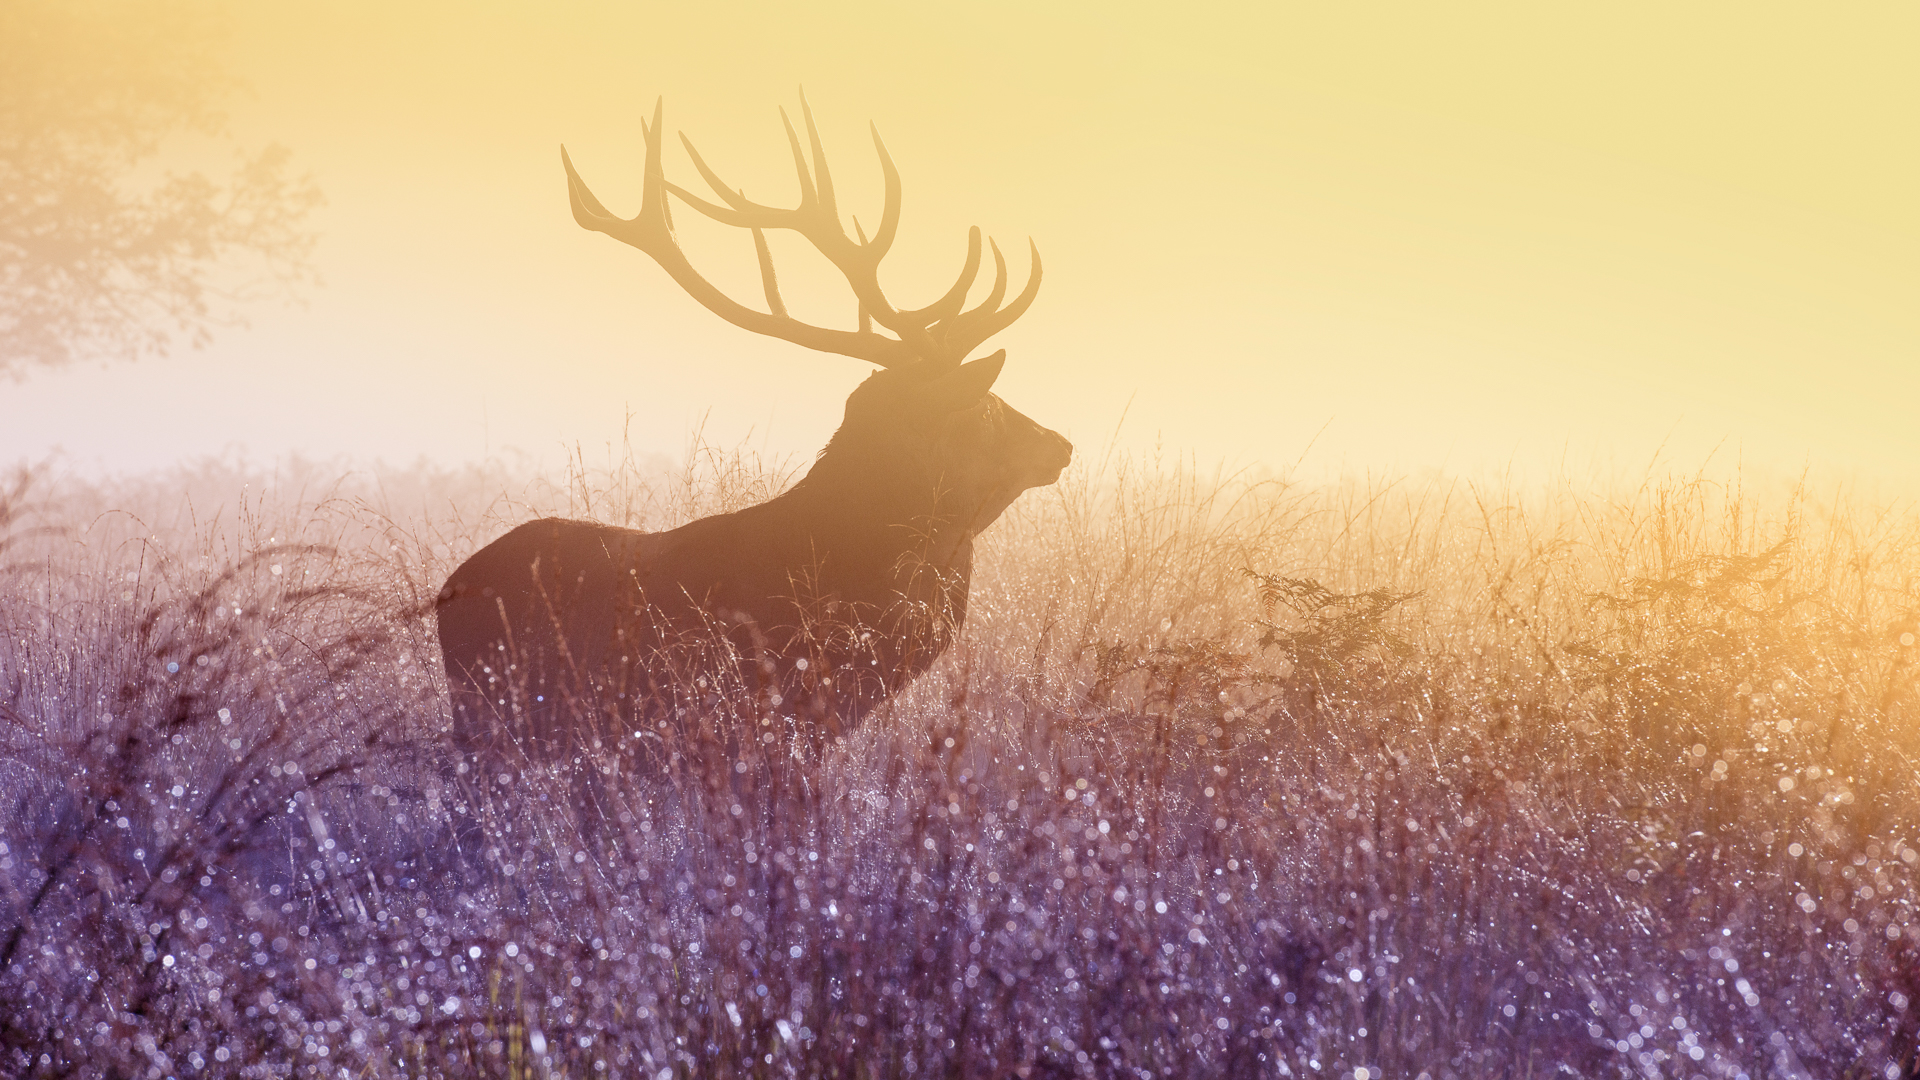 General 1920x1080 deer animals nature mist morning dew antlers yellow calm purple grass field wildlife wet bright sunlight silhouette looking into the distance daylight plants